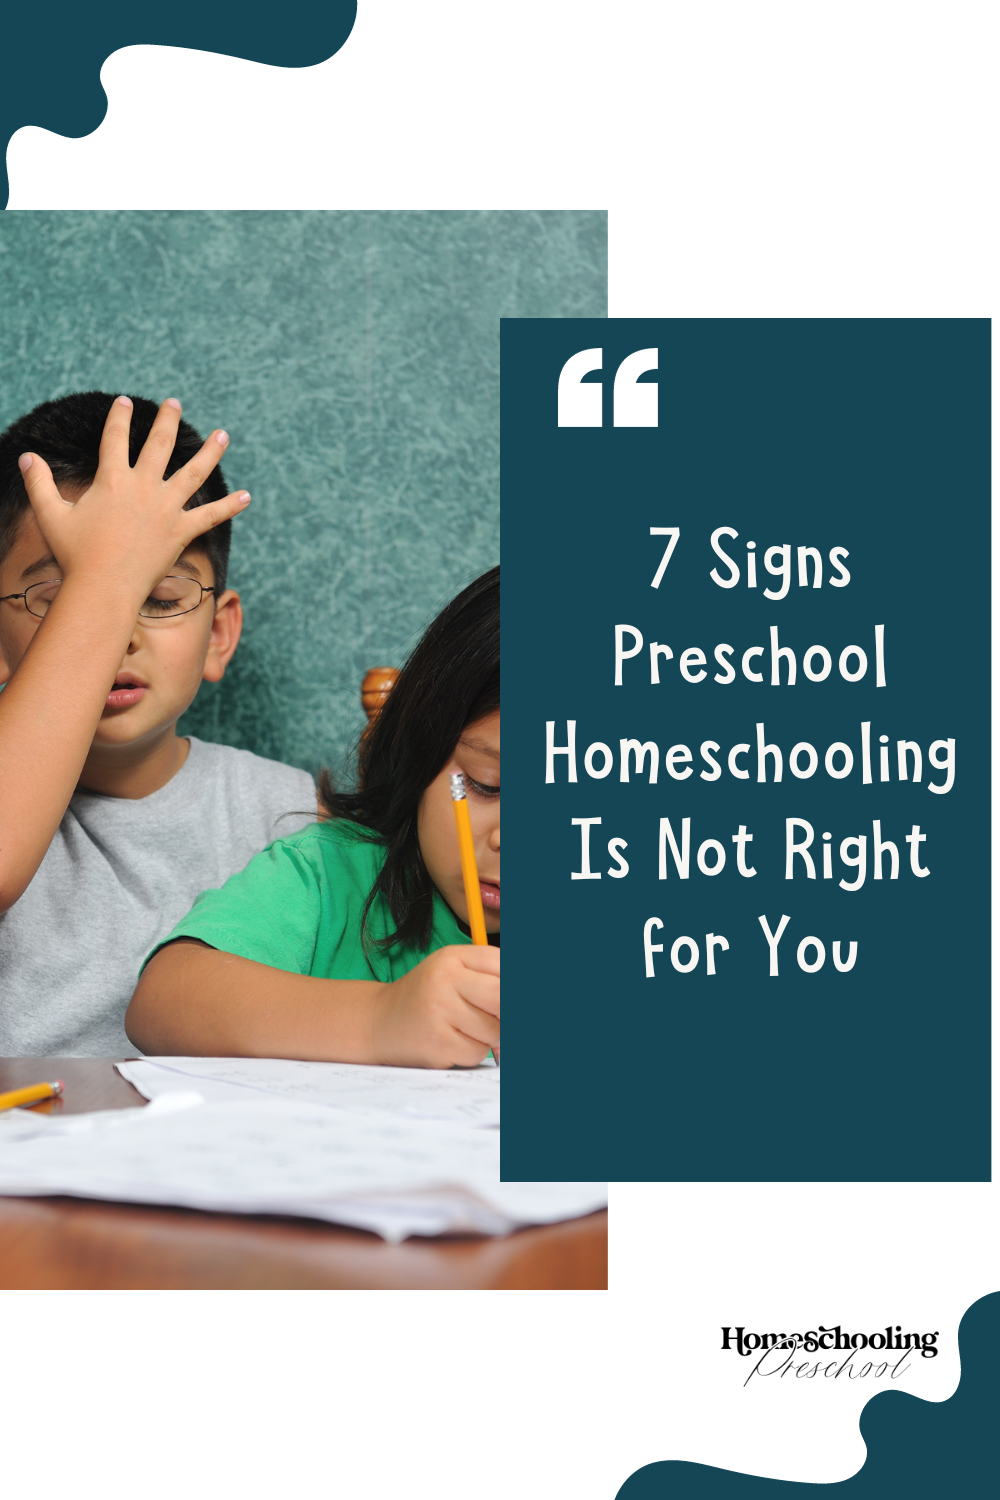 7 Signs Preschool Homeschooling Is Not Right for You